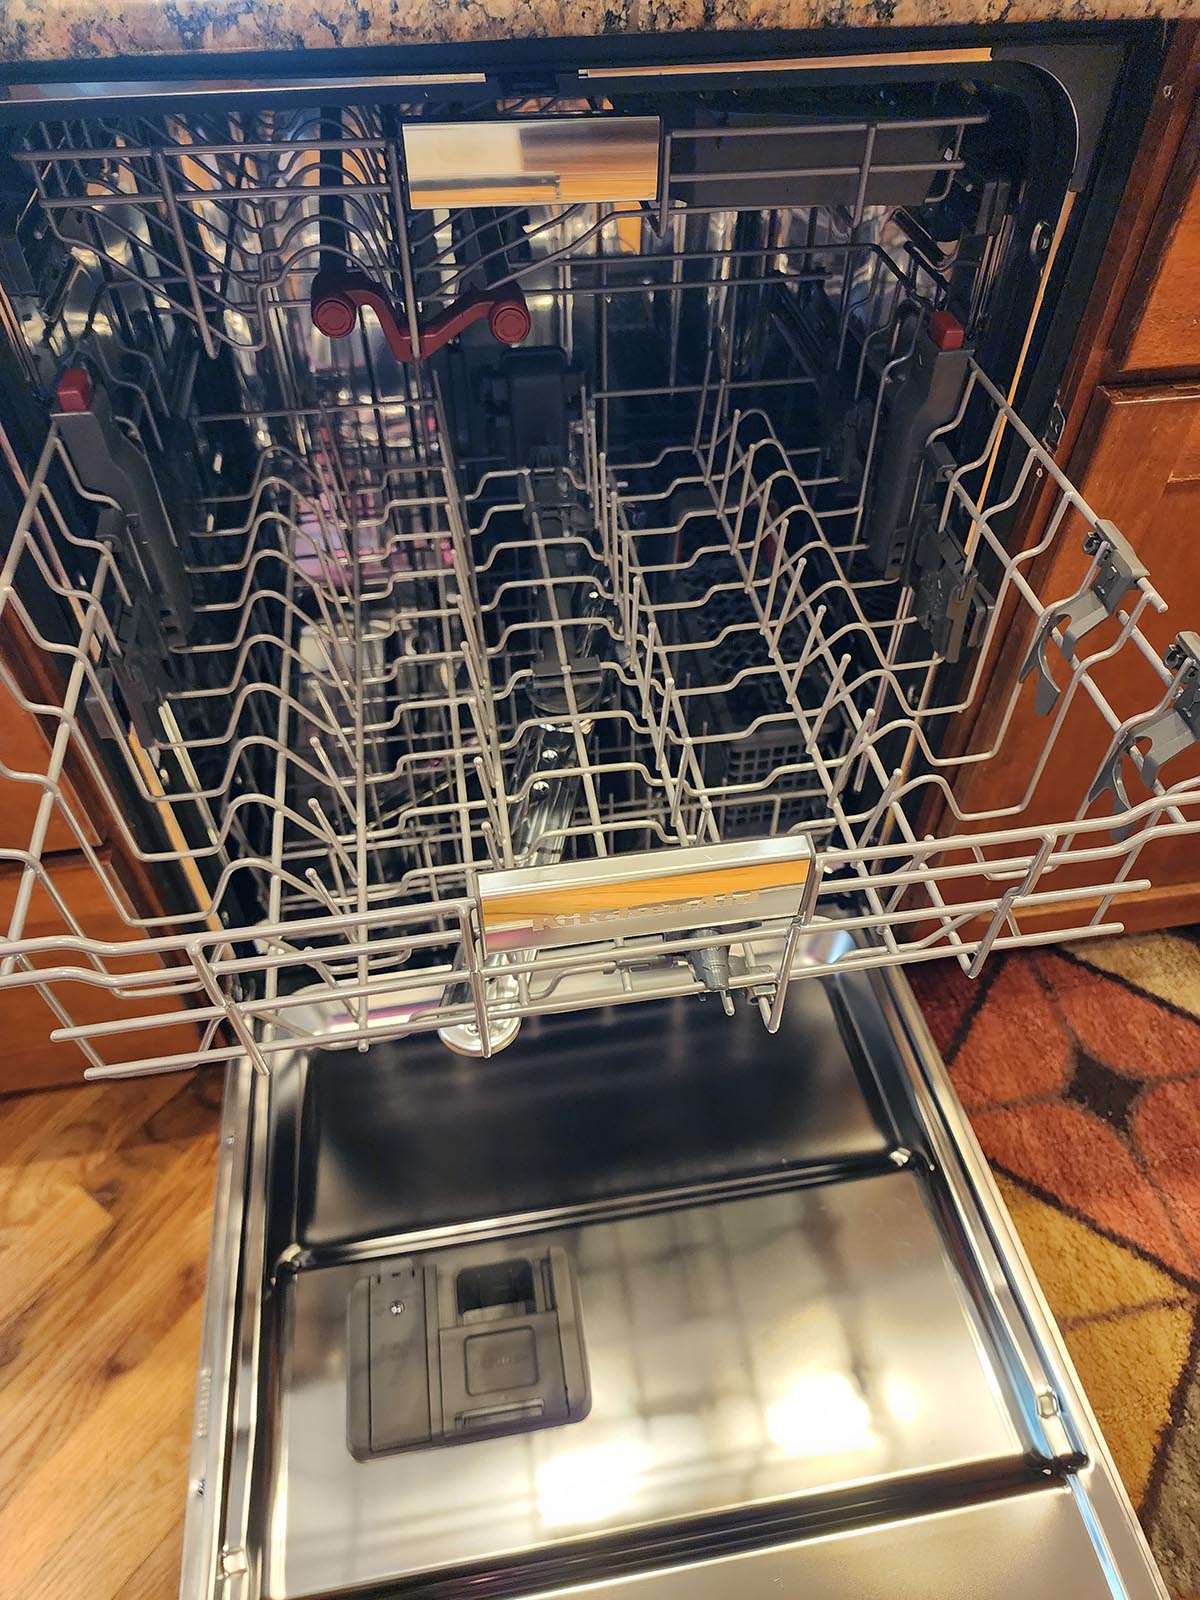 The KitchenAid FreeFlex dishwasher with the middle rack fully extended